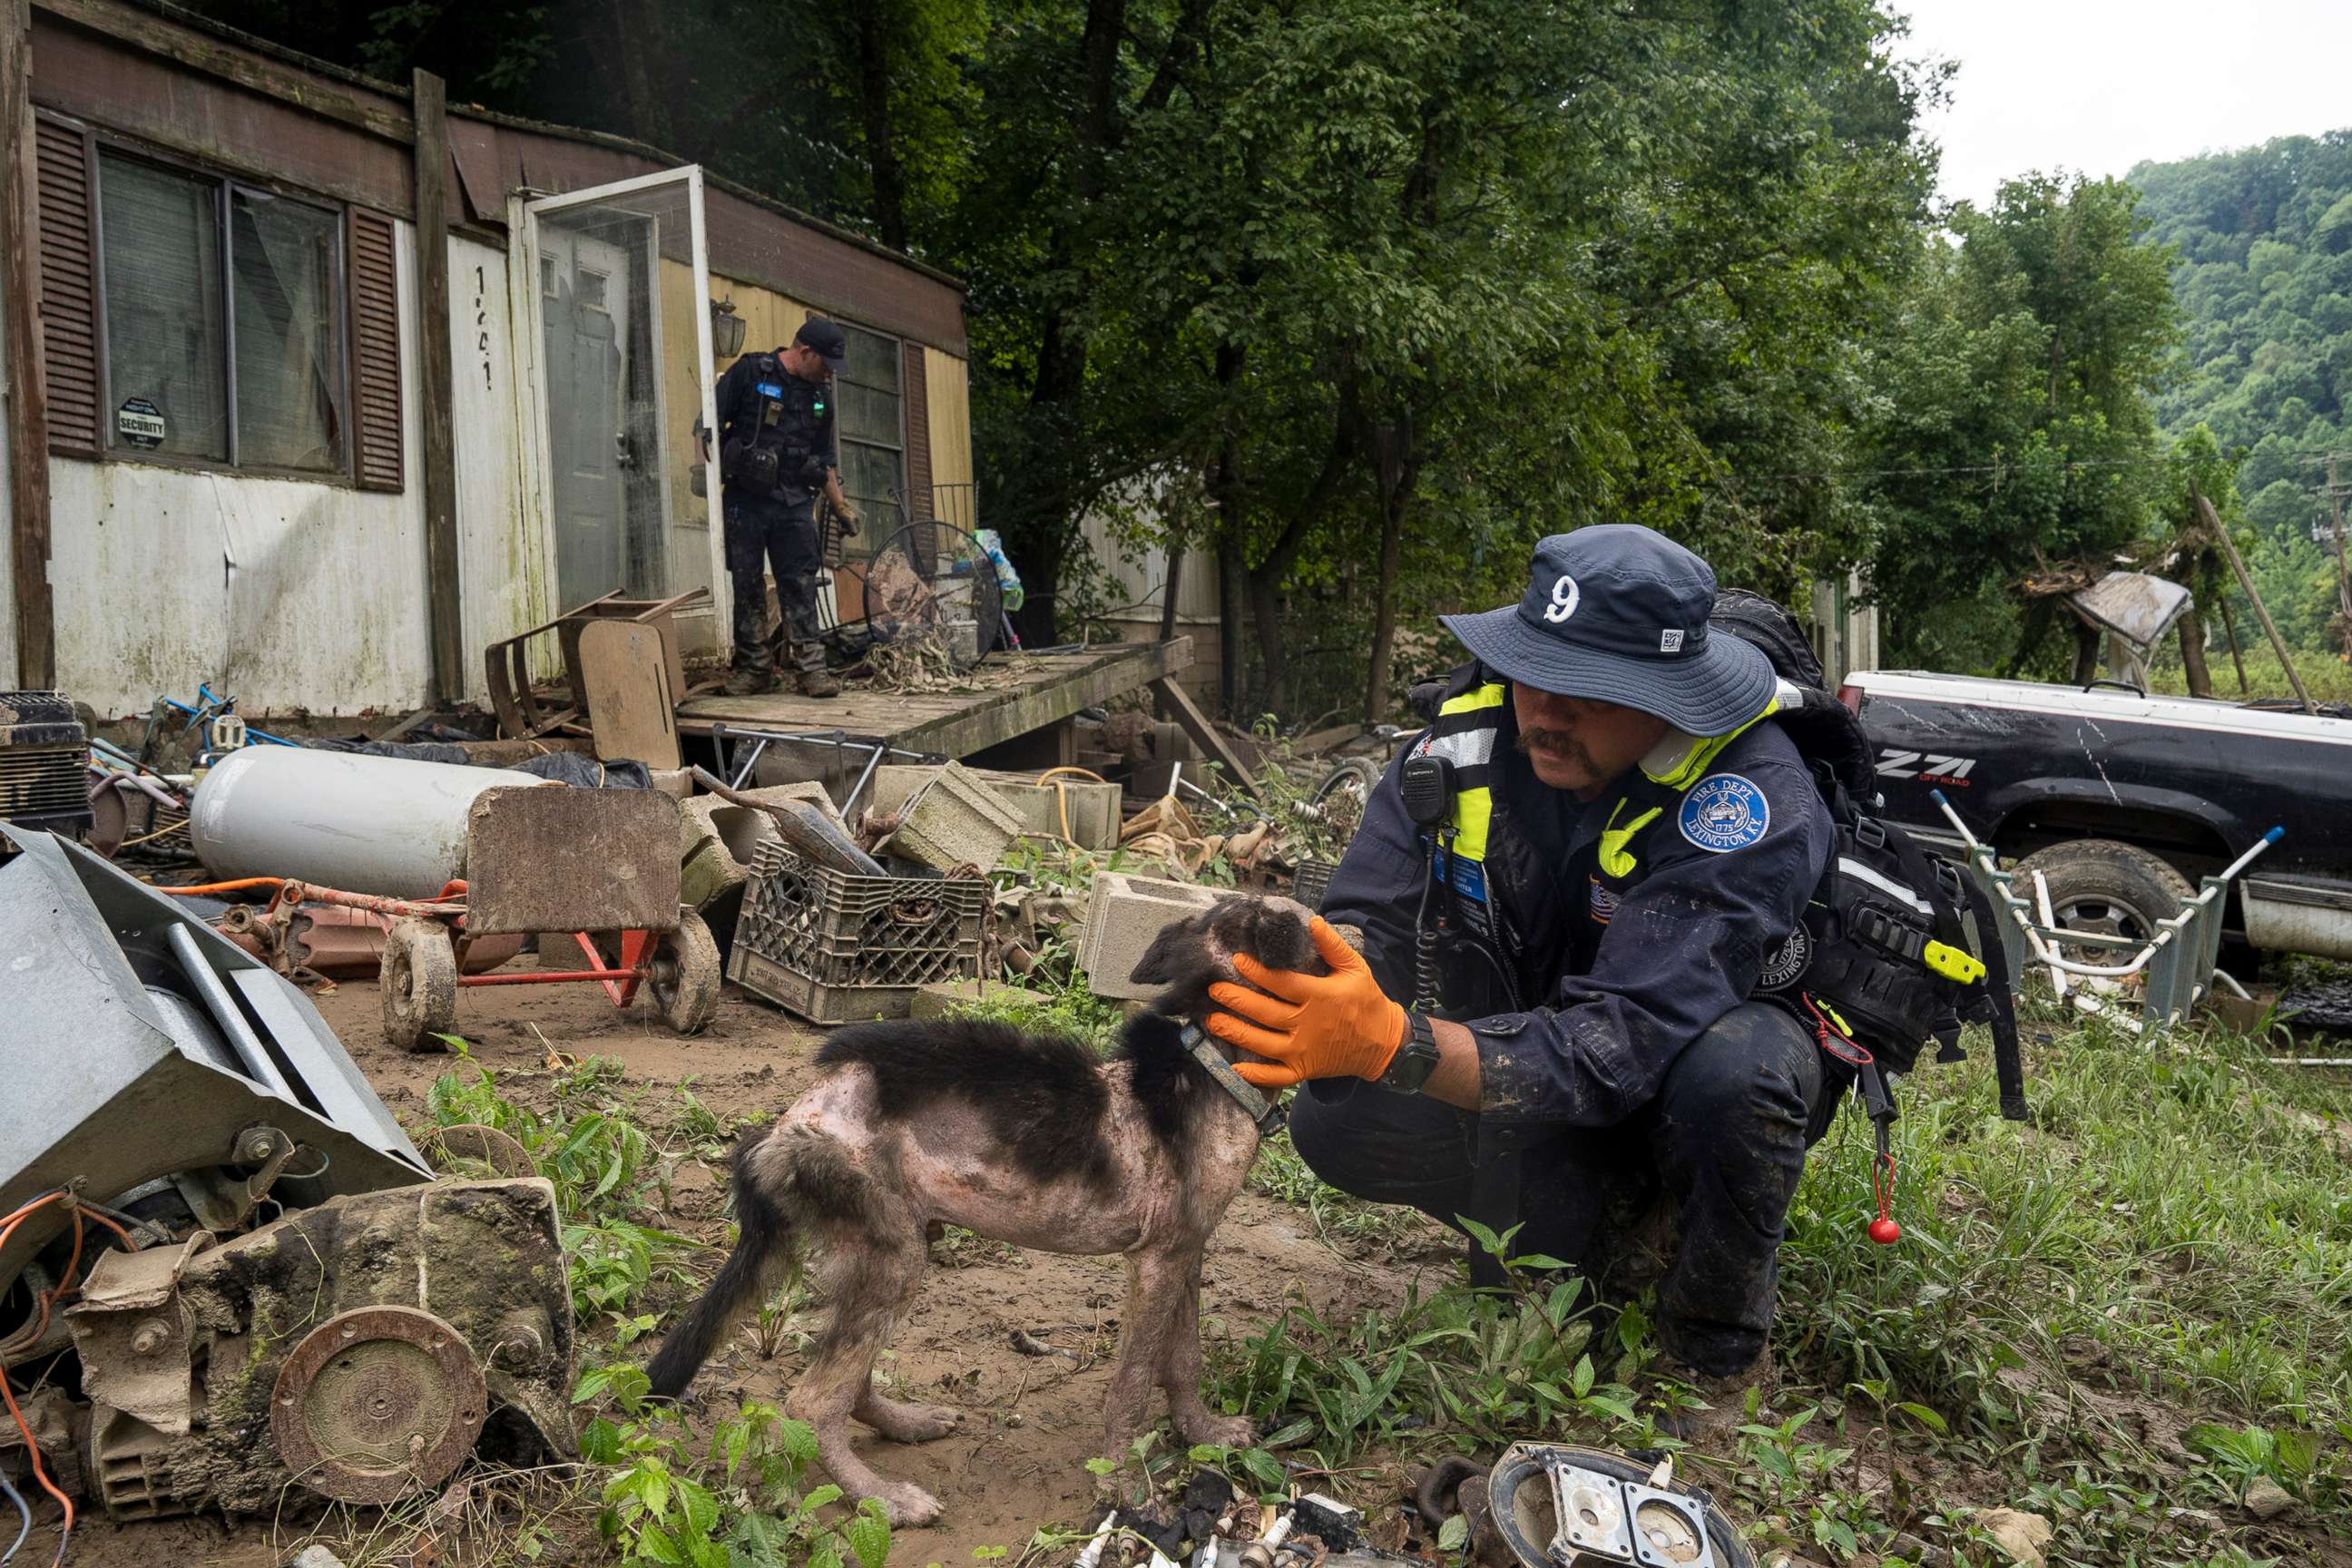 PHOTO: A firefighter from the Lexington Fire Department Search and Rescue team checks on a dog during a targeted search on Highway 476 where three people are still unaccounted for, July 31, 2022, near Jackson, Ky.